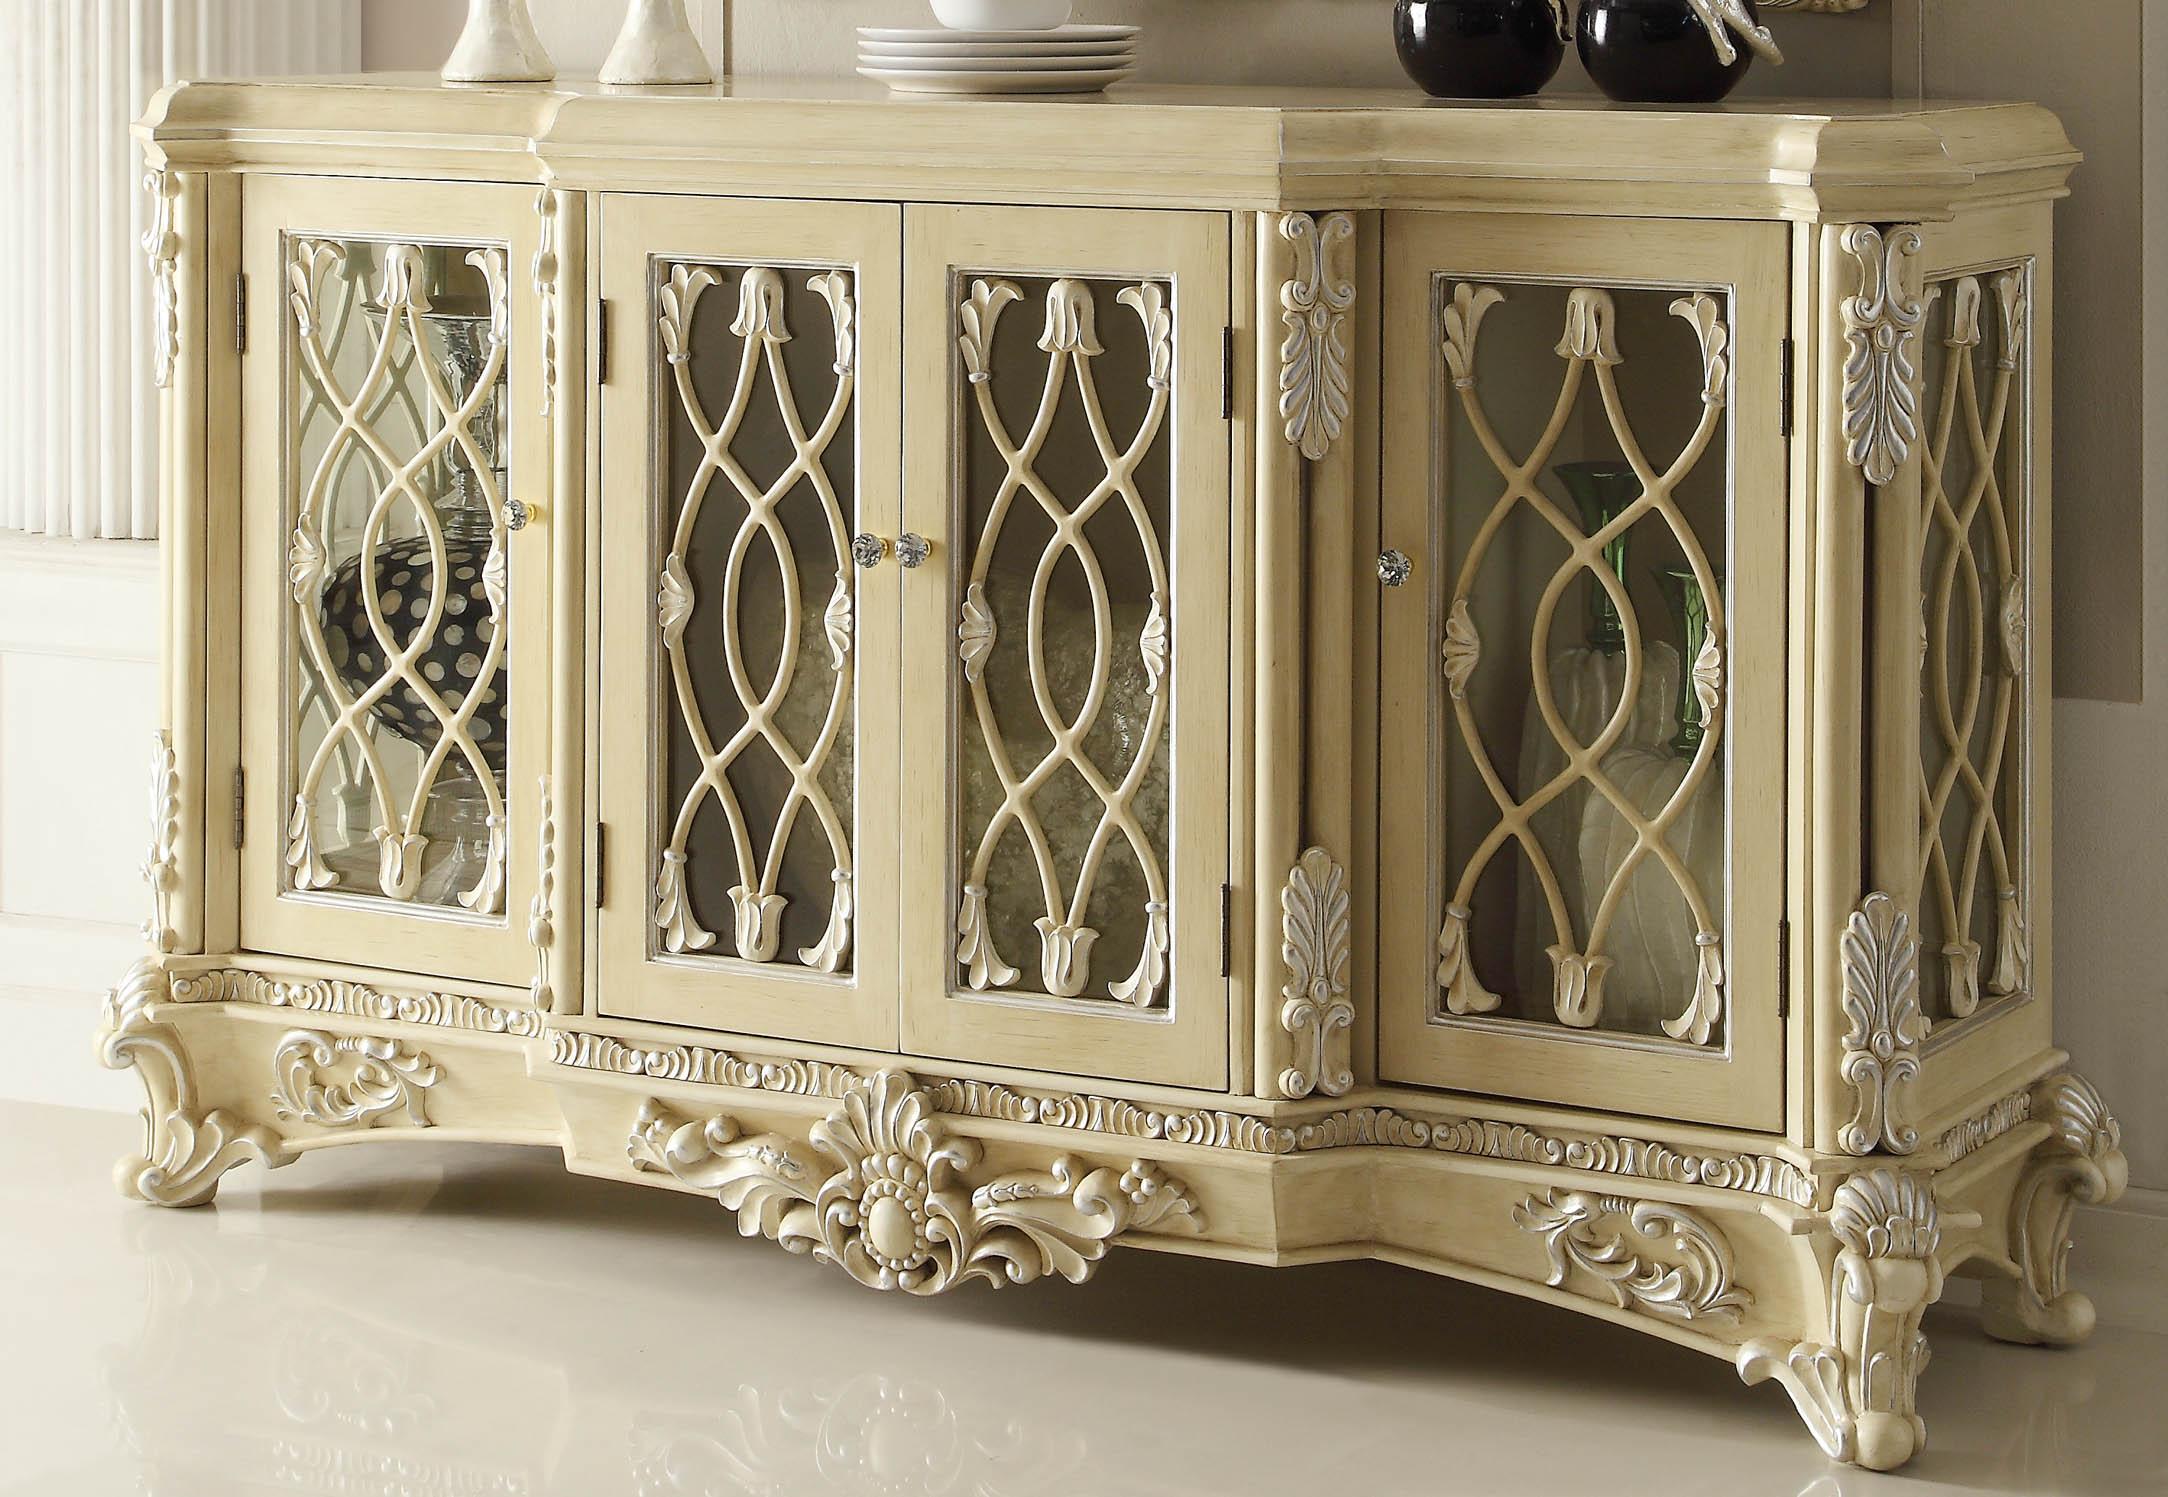 

    
Luxury Cream Carved Wood Buffet Traditional Homey Design HD-5800
